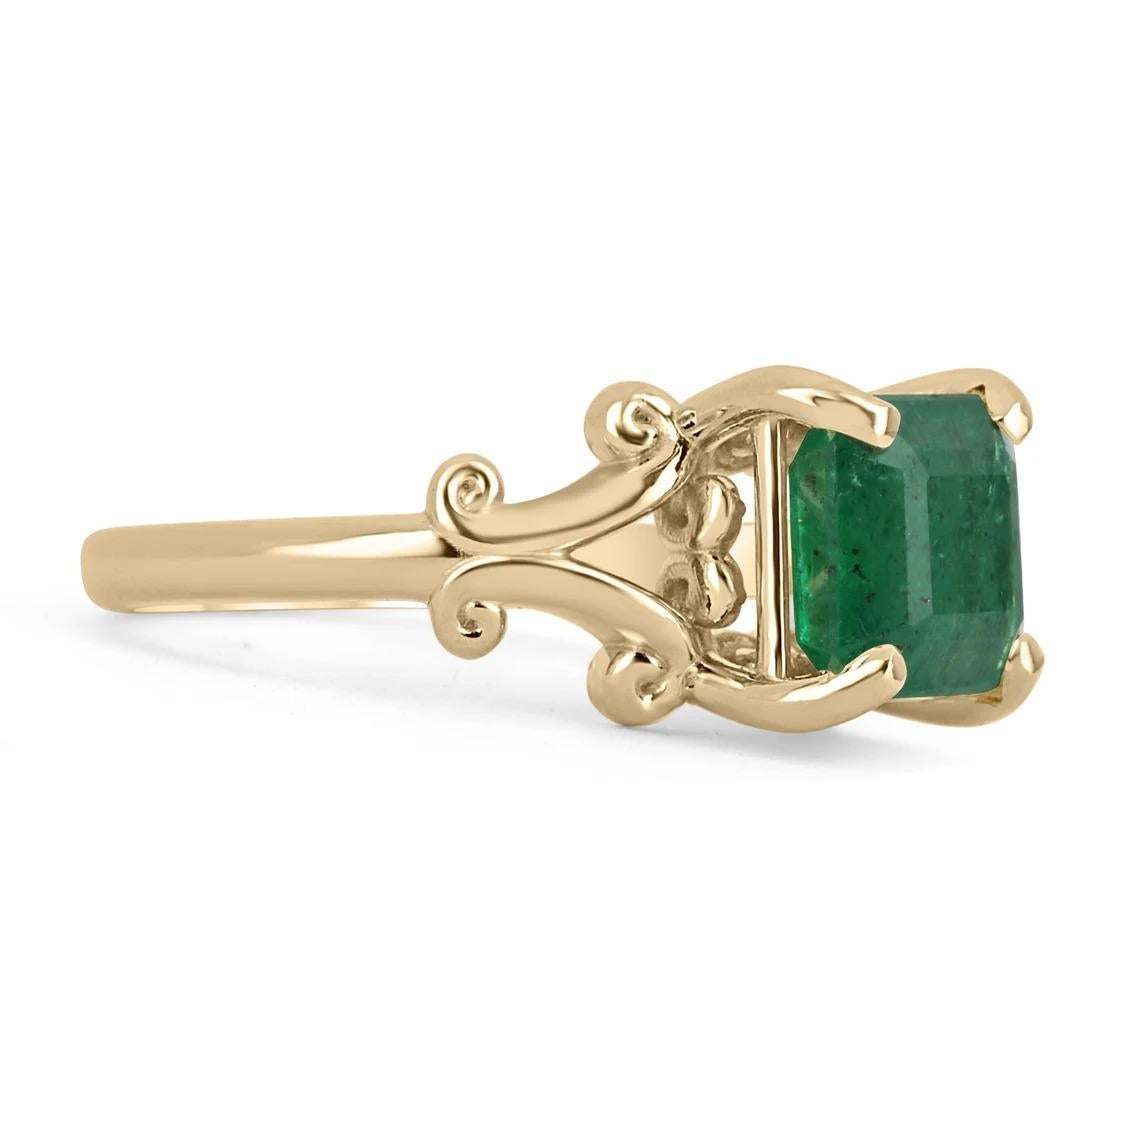 Featured is a remarkable, emerald solitaire ring. The featured gem carries an impressive 2.63-carat, Asscher-cut Zambian emerald with stunning characteristics. Set in a unique four-prong, solitaire 14K yellow gold setting.

Setting Style: